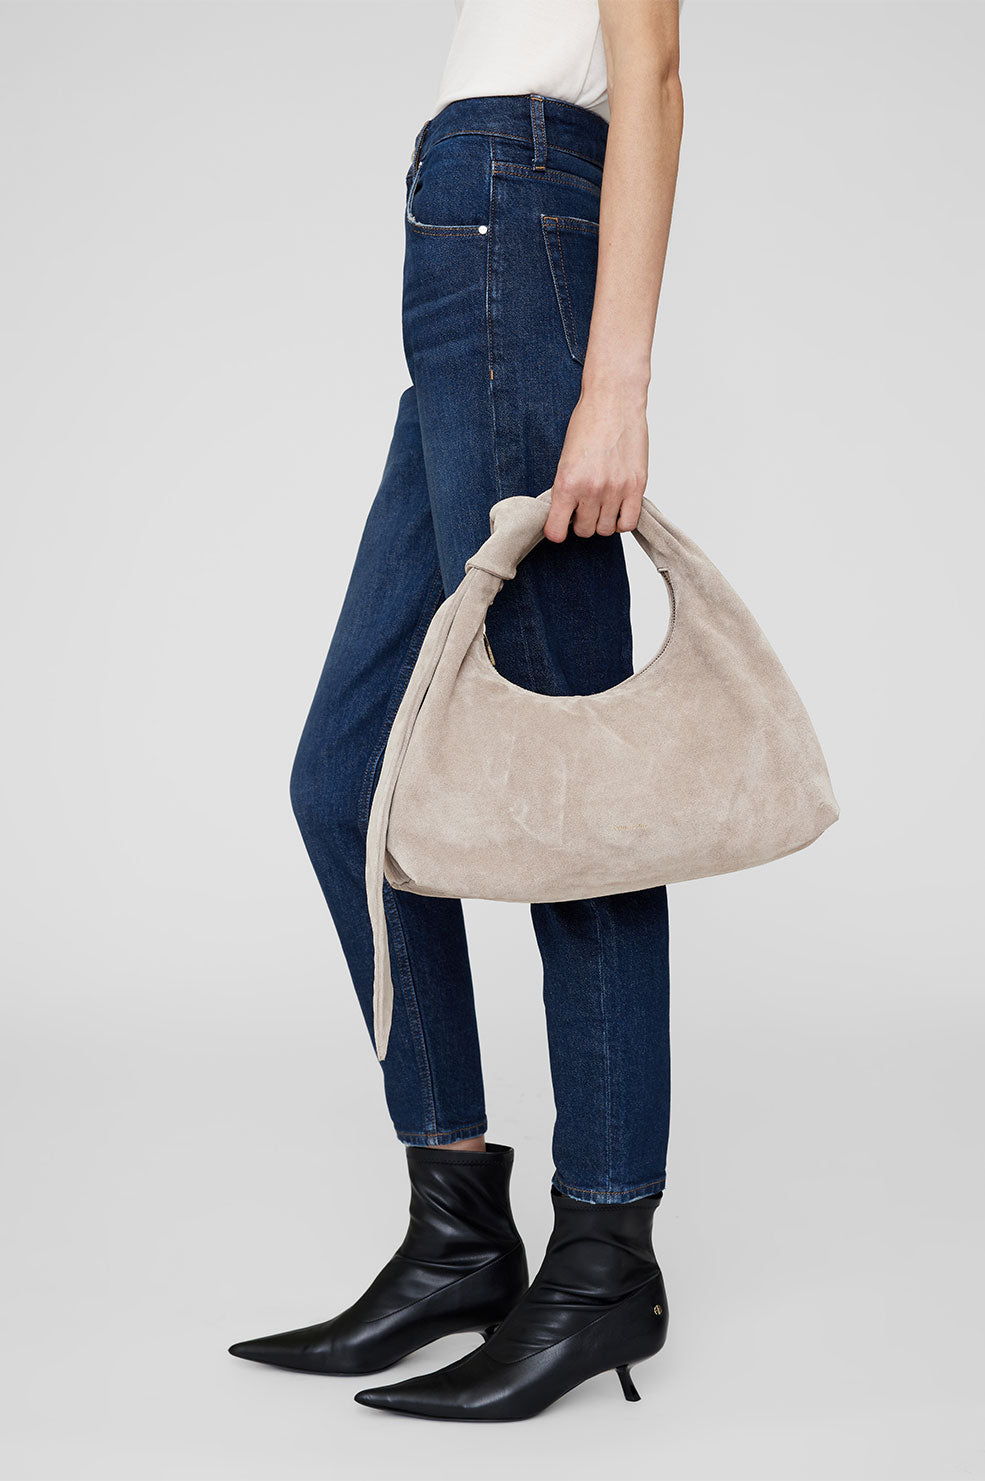 Anine Bing Launches Nico Bag, Finds Her Voice In Winter Collection